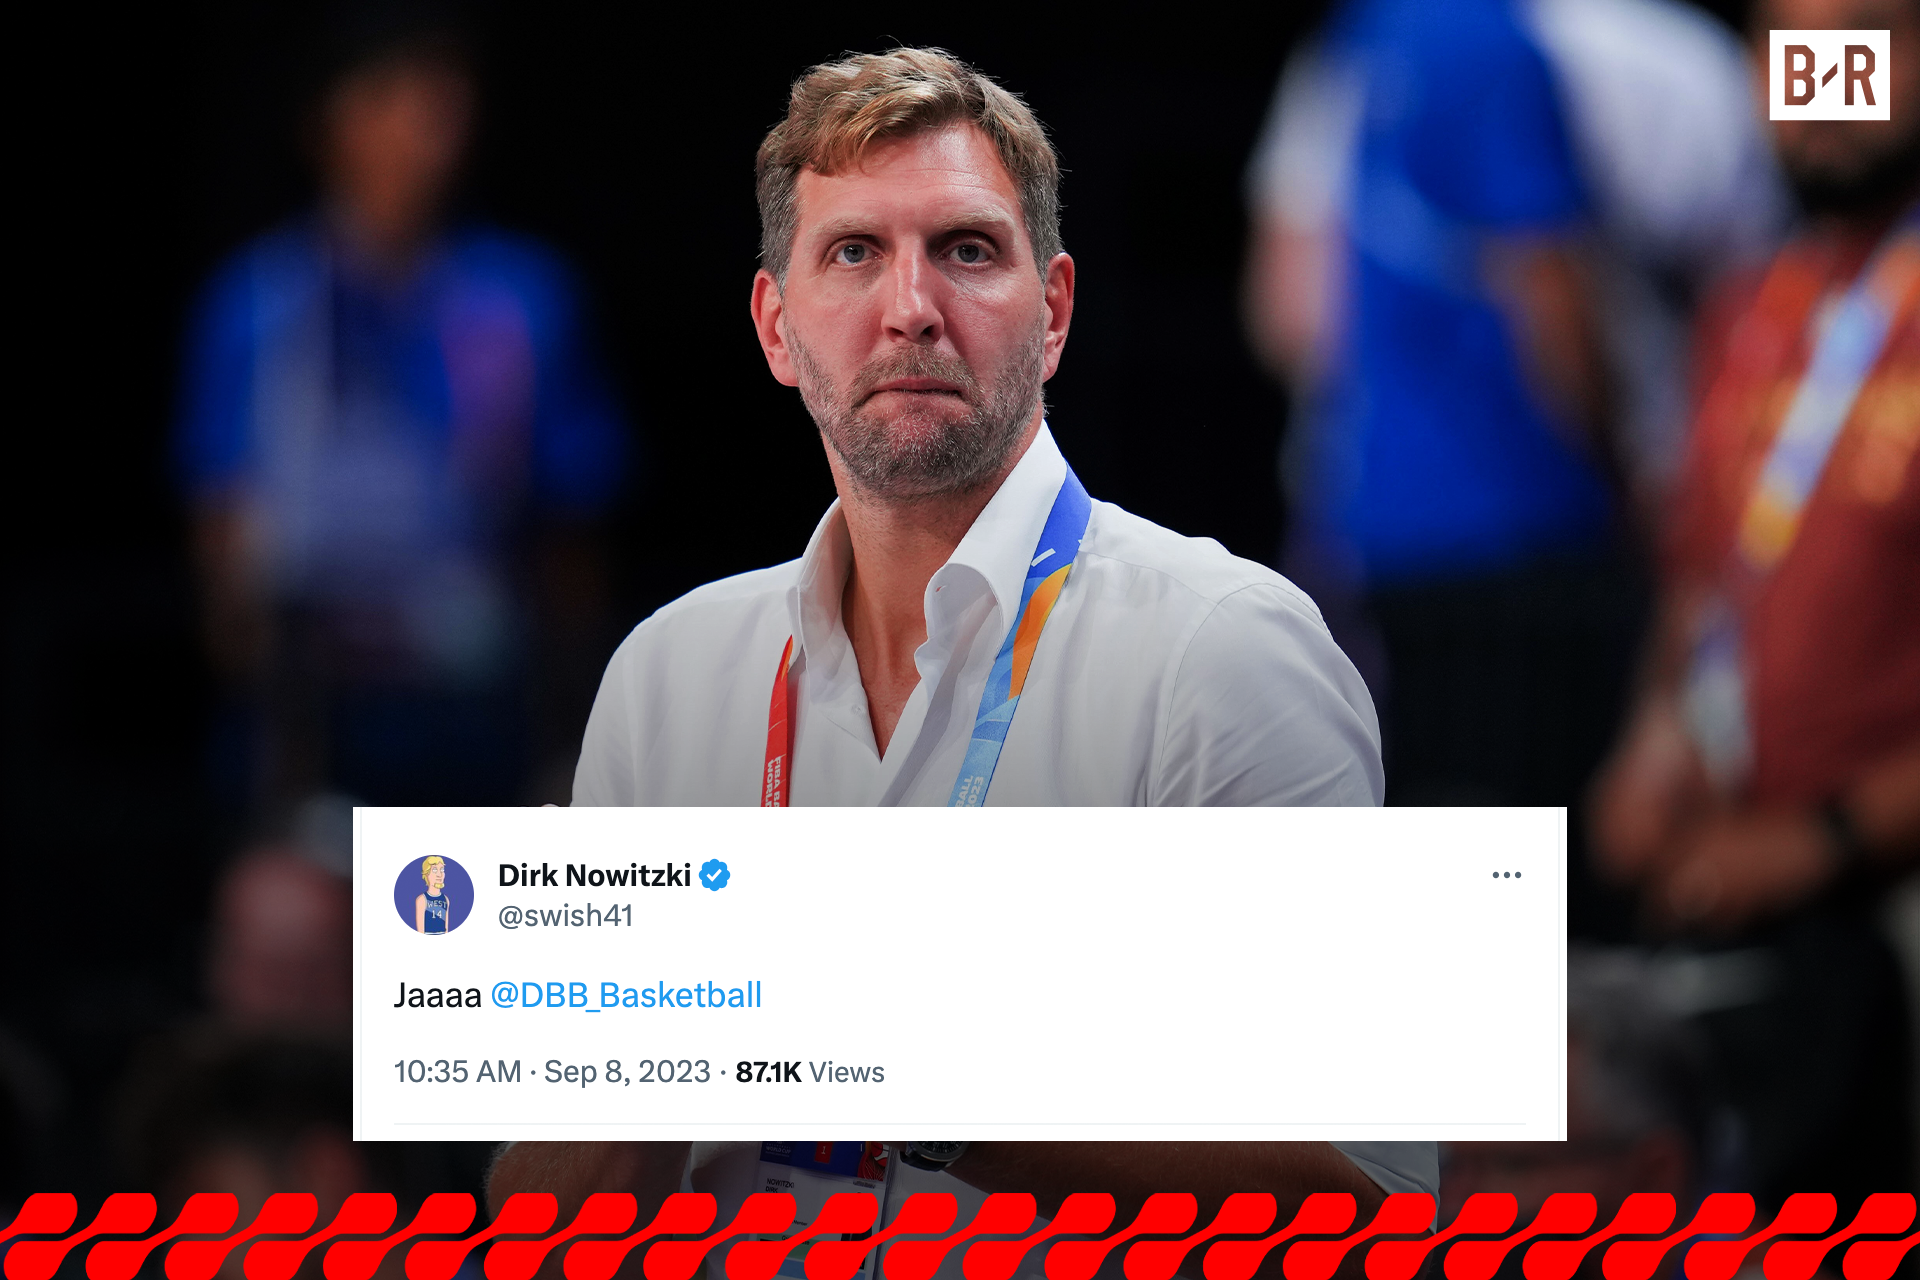 Dirk Nowitzki to get his jersey retired by Germany at EuroBasket